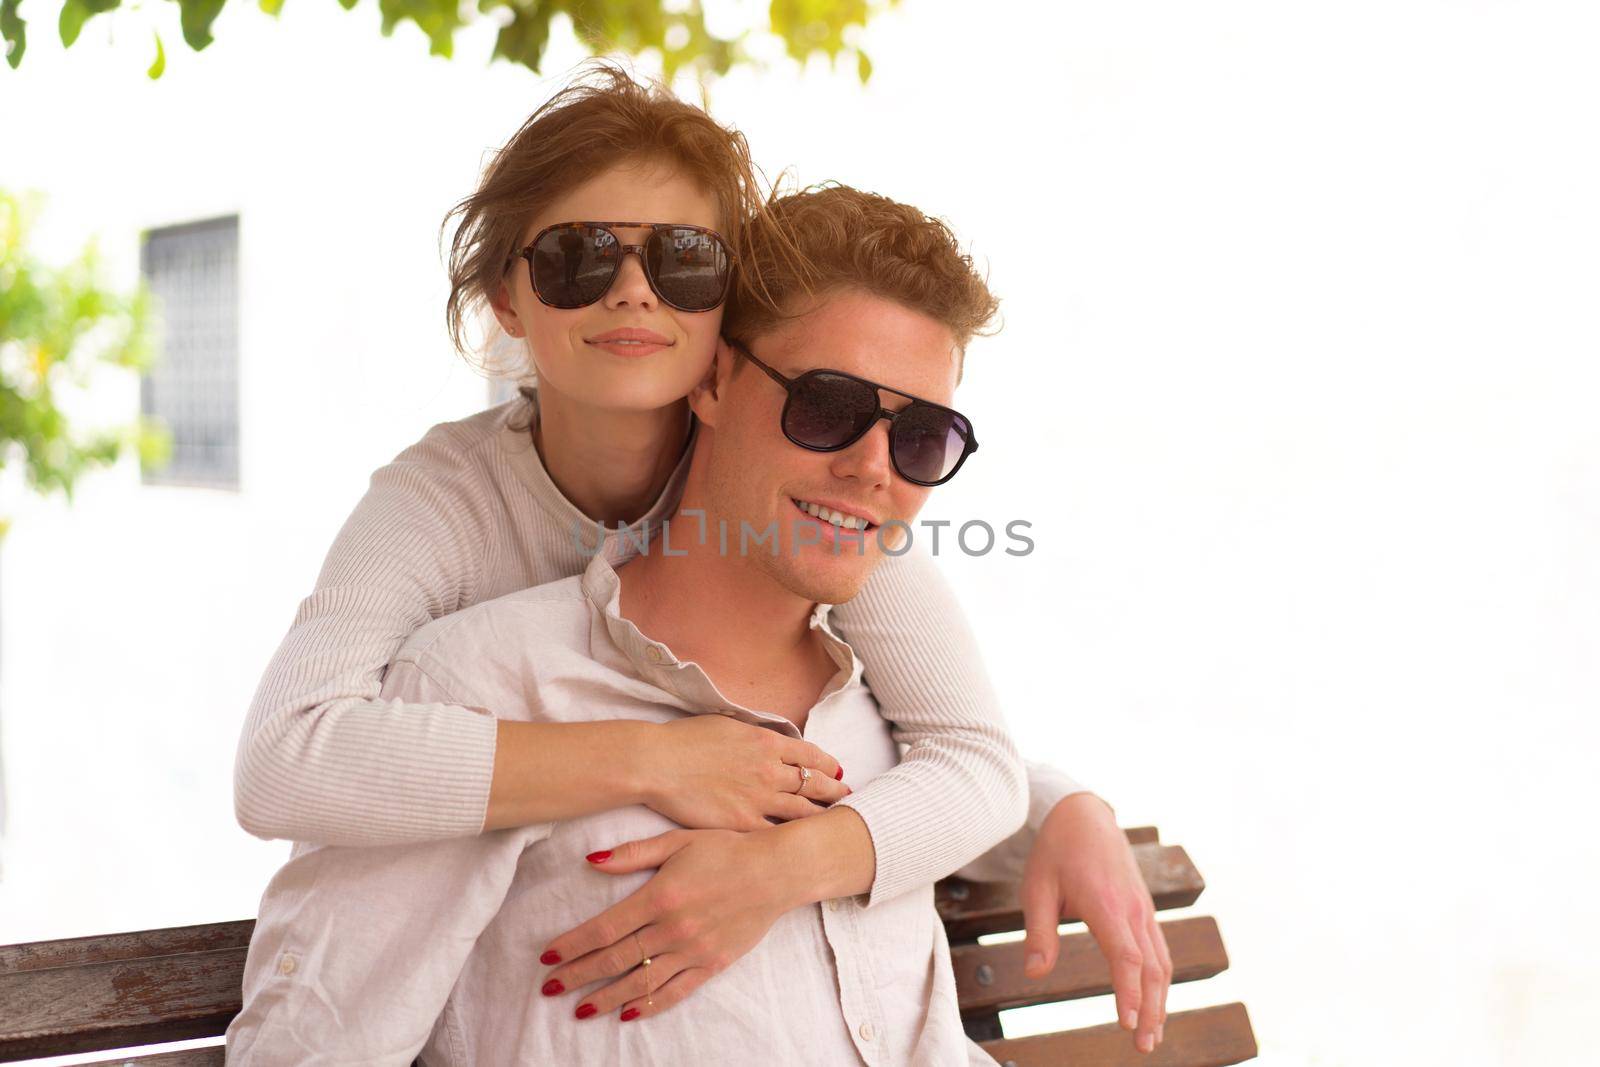 Smiling beautiful woman and her handsome boyfriend. Woman embrace summer day. Happy cheerful couple in sunglasses walking old city park. Couple posing on the street near green tree